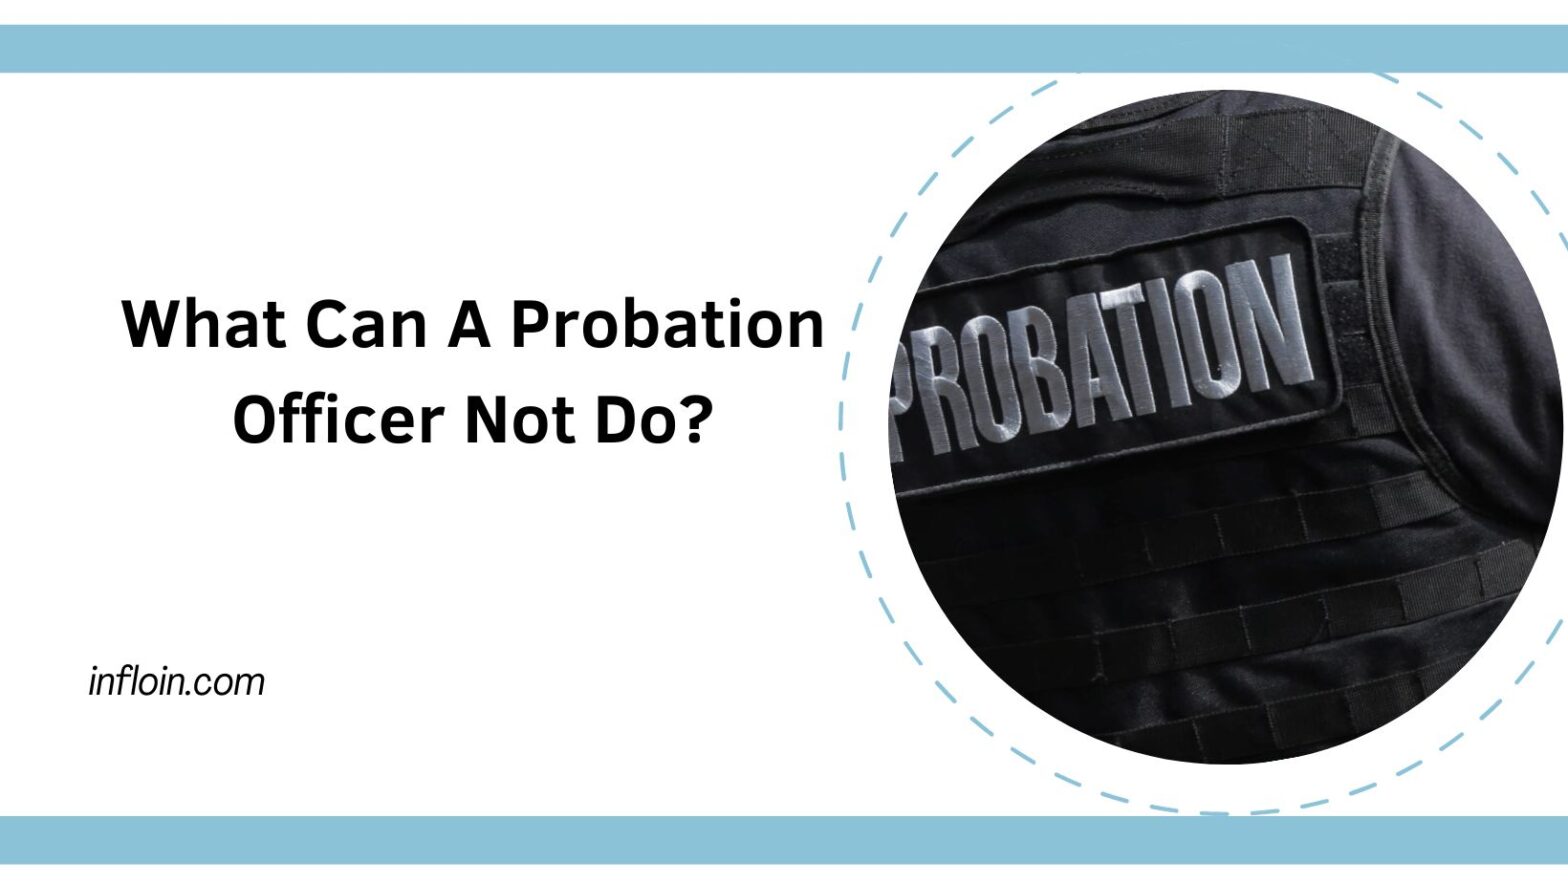 What Can a Probation Officer Not Do